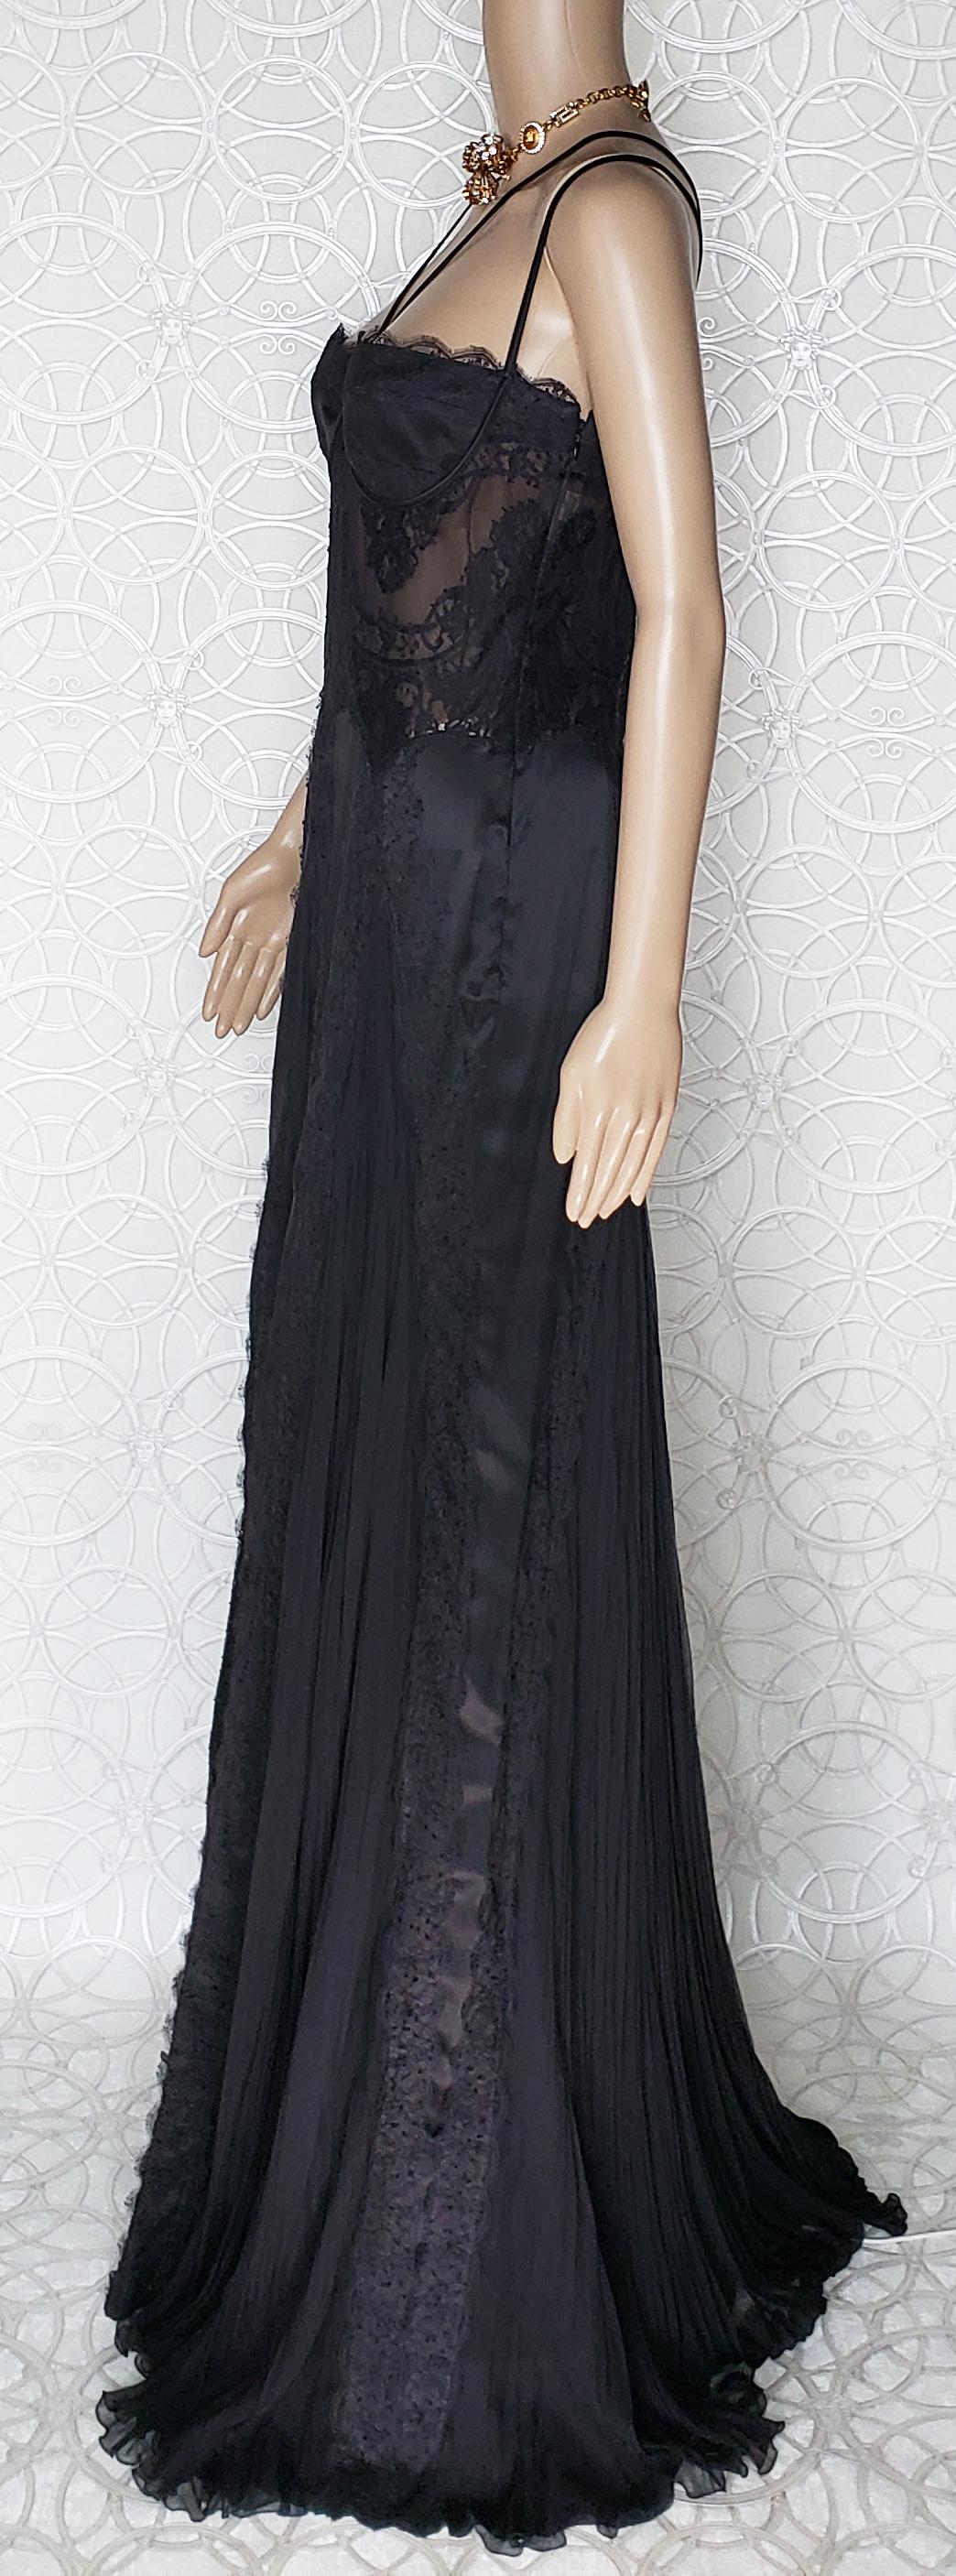 Women's Fall 2003/2004 VINTAGE VERSACE BLACK SILK DRESS GOWN W/SHEER LACE Bodice  For Sale